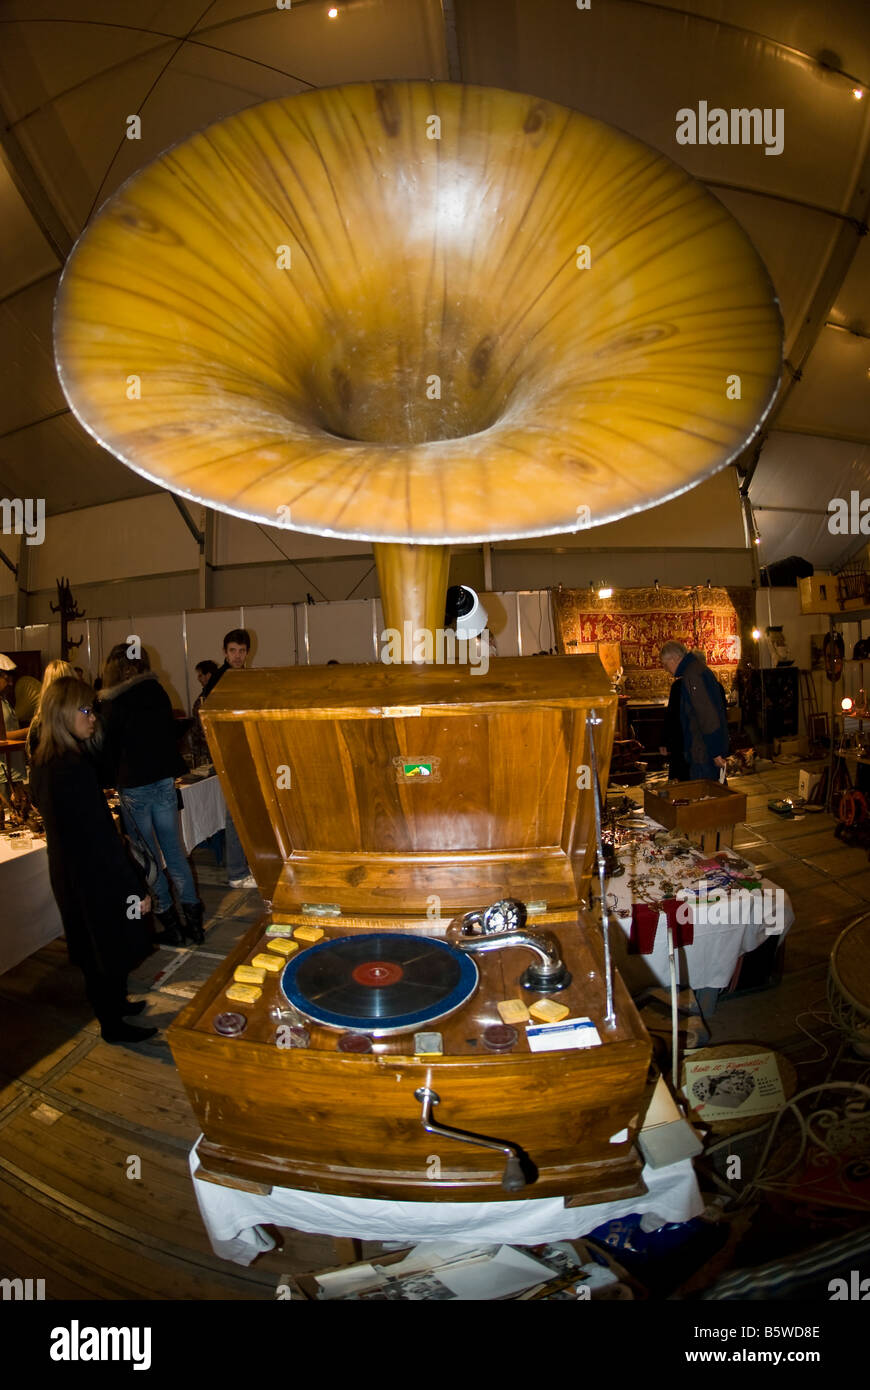 An old RCA Victor phonograph at an antiques fair Stock Photo